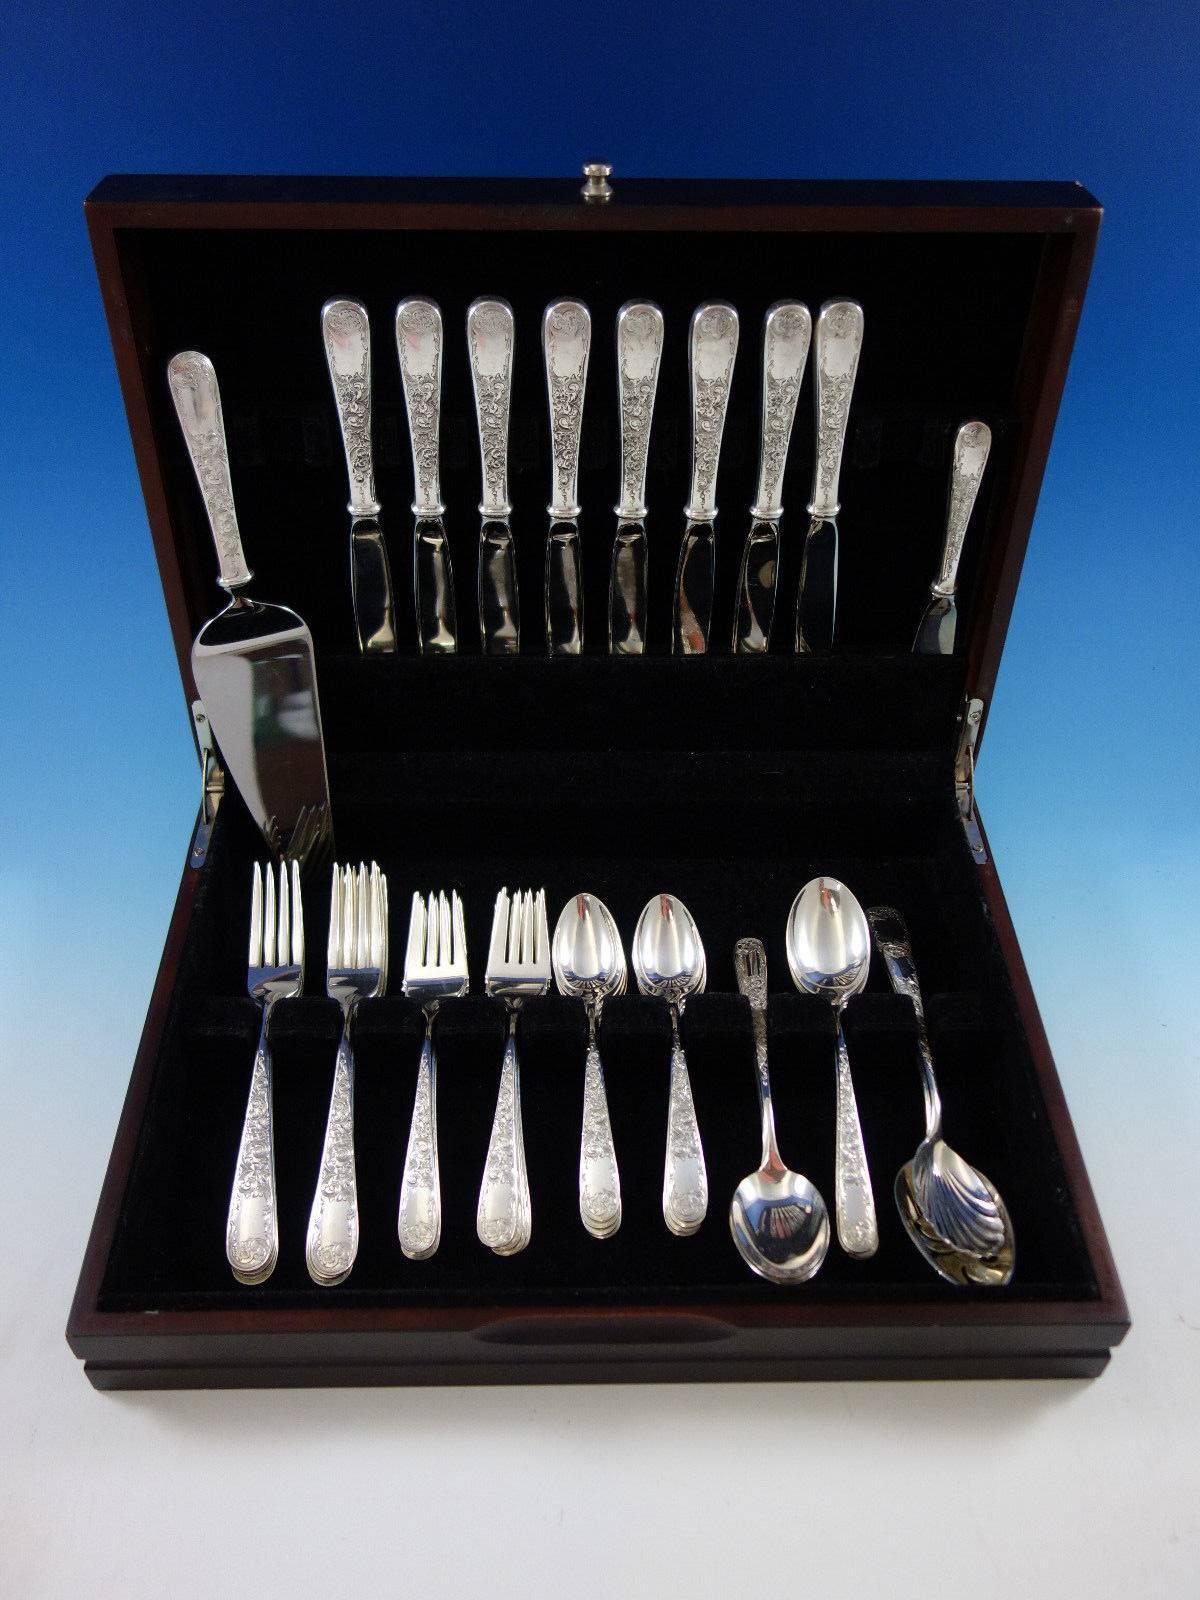 Gorgeous Old Maryland Plain by Kirk Sterling Silver Flatware set - 44 pieces. This set includes:

8 Knives, 8 7/8